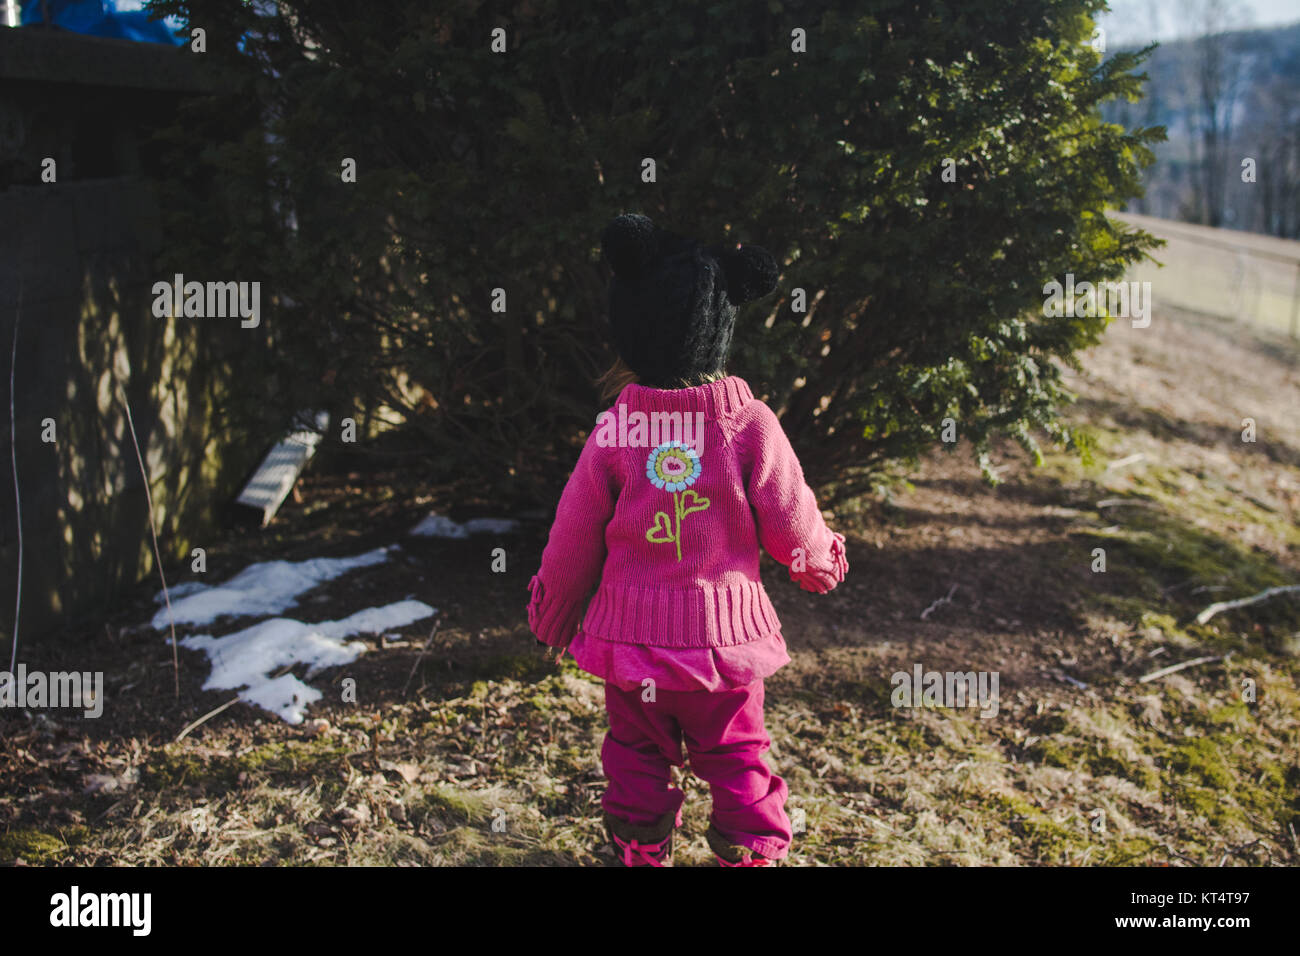 A child stands near a green bush during the winter, while wearing a pink sweater. Stock Photo